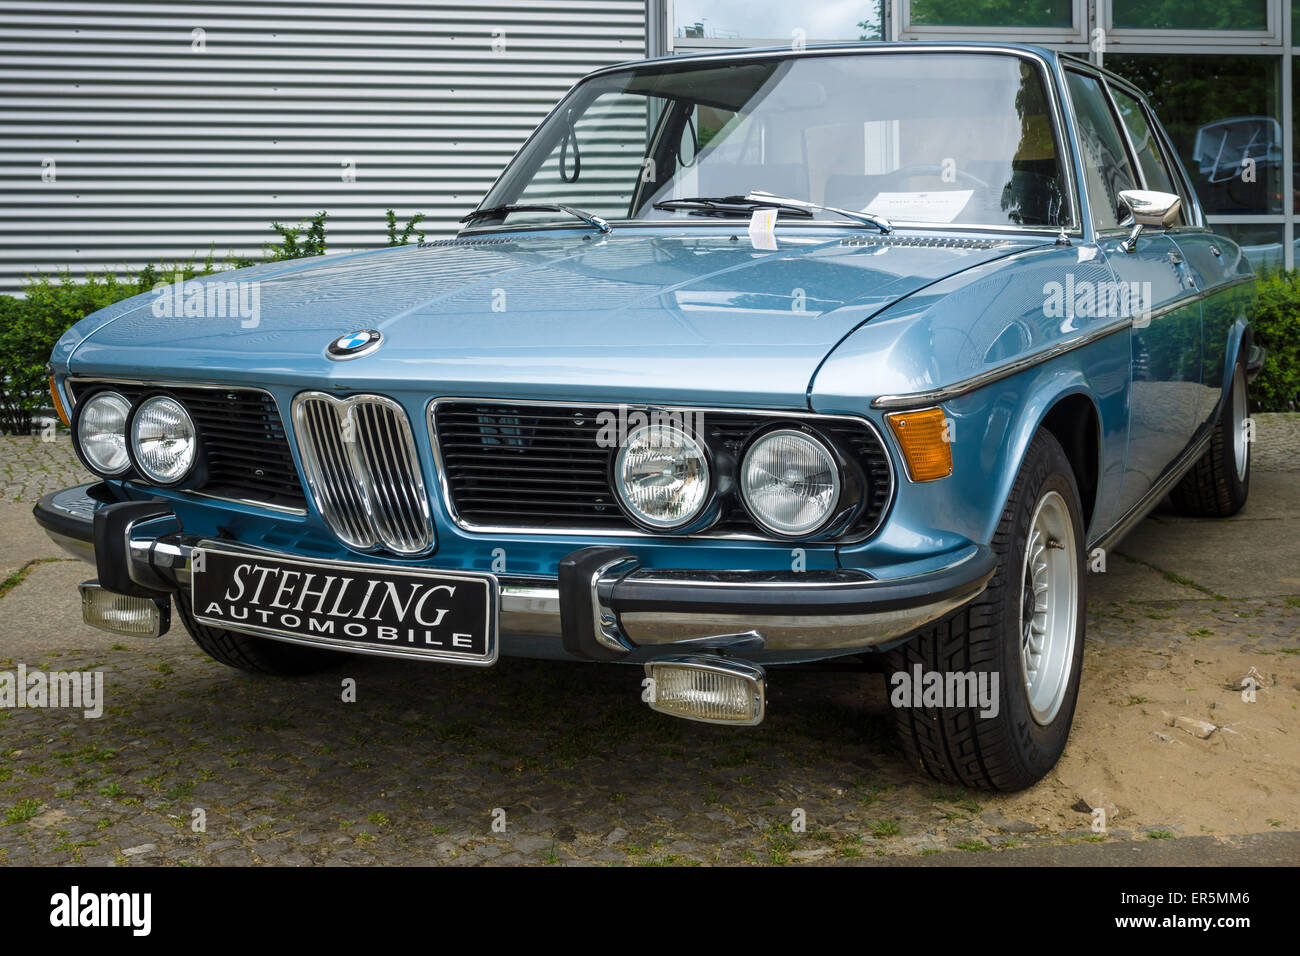 BERLIN - MAY 10, 2015: Full-size luxury car BMW New Six (E3), 1981. The